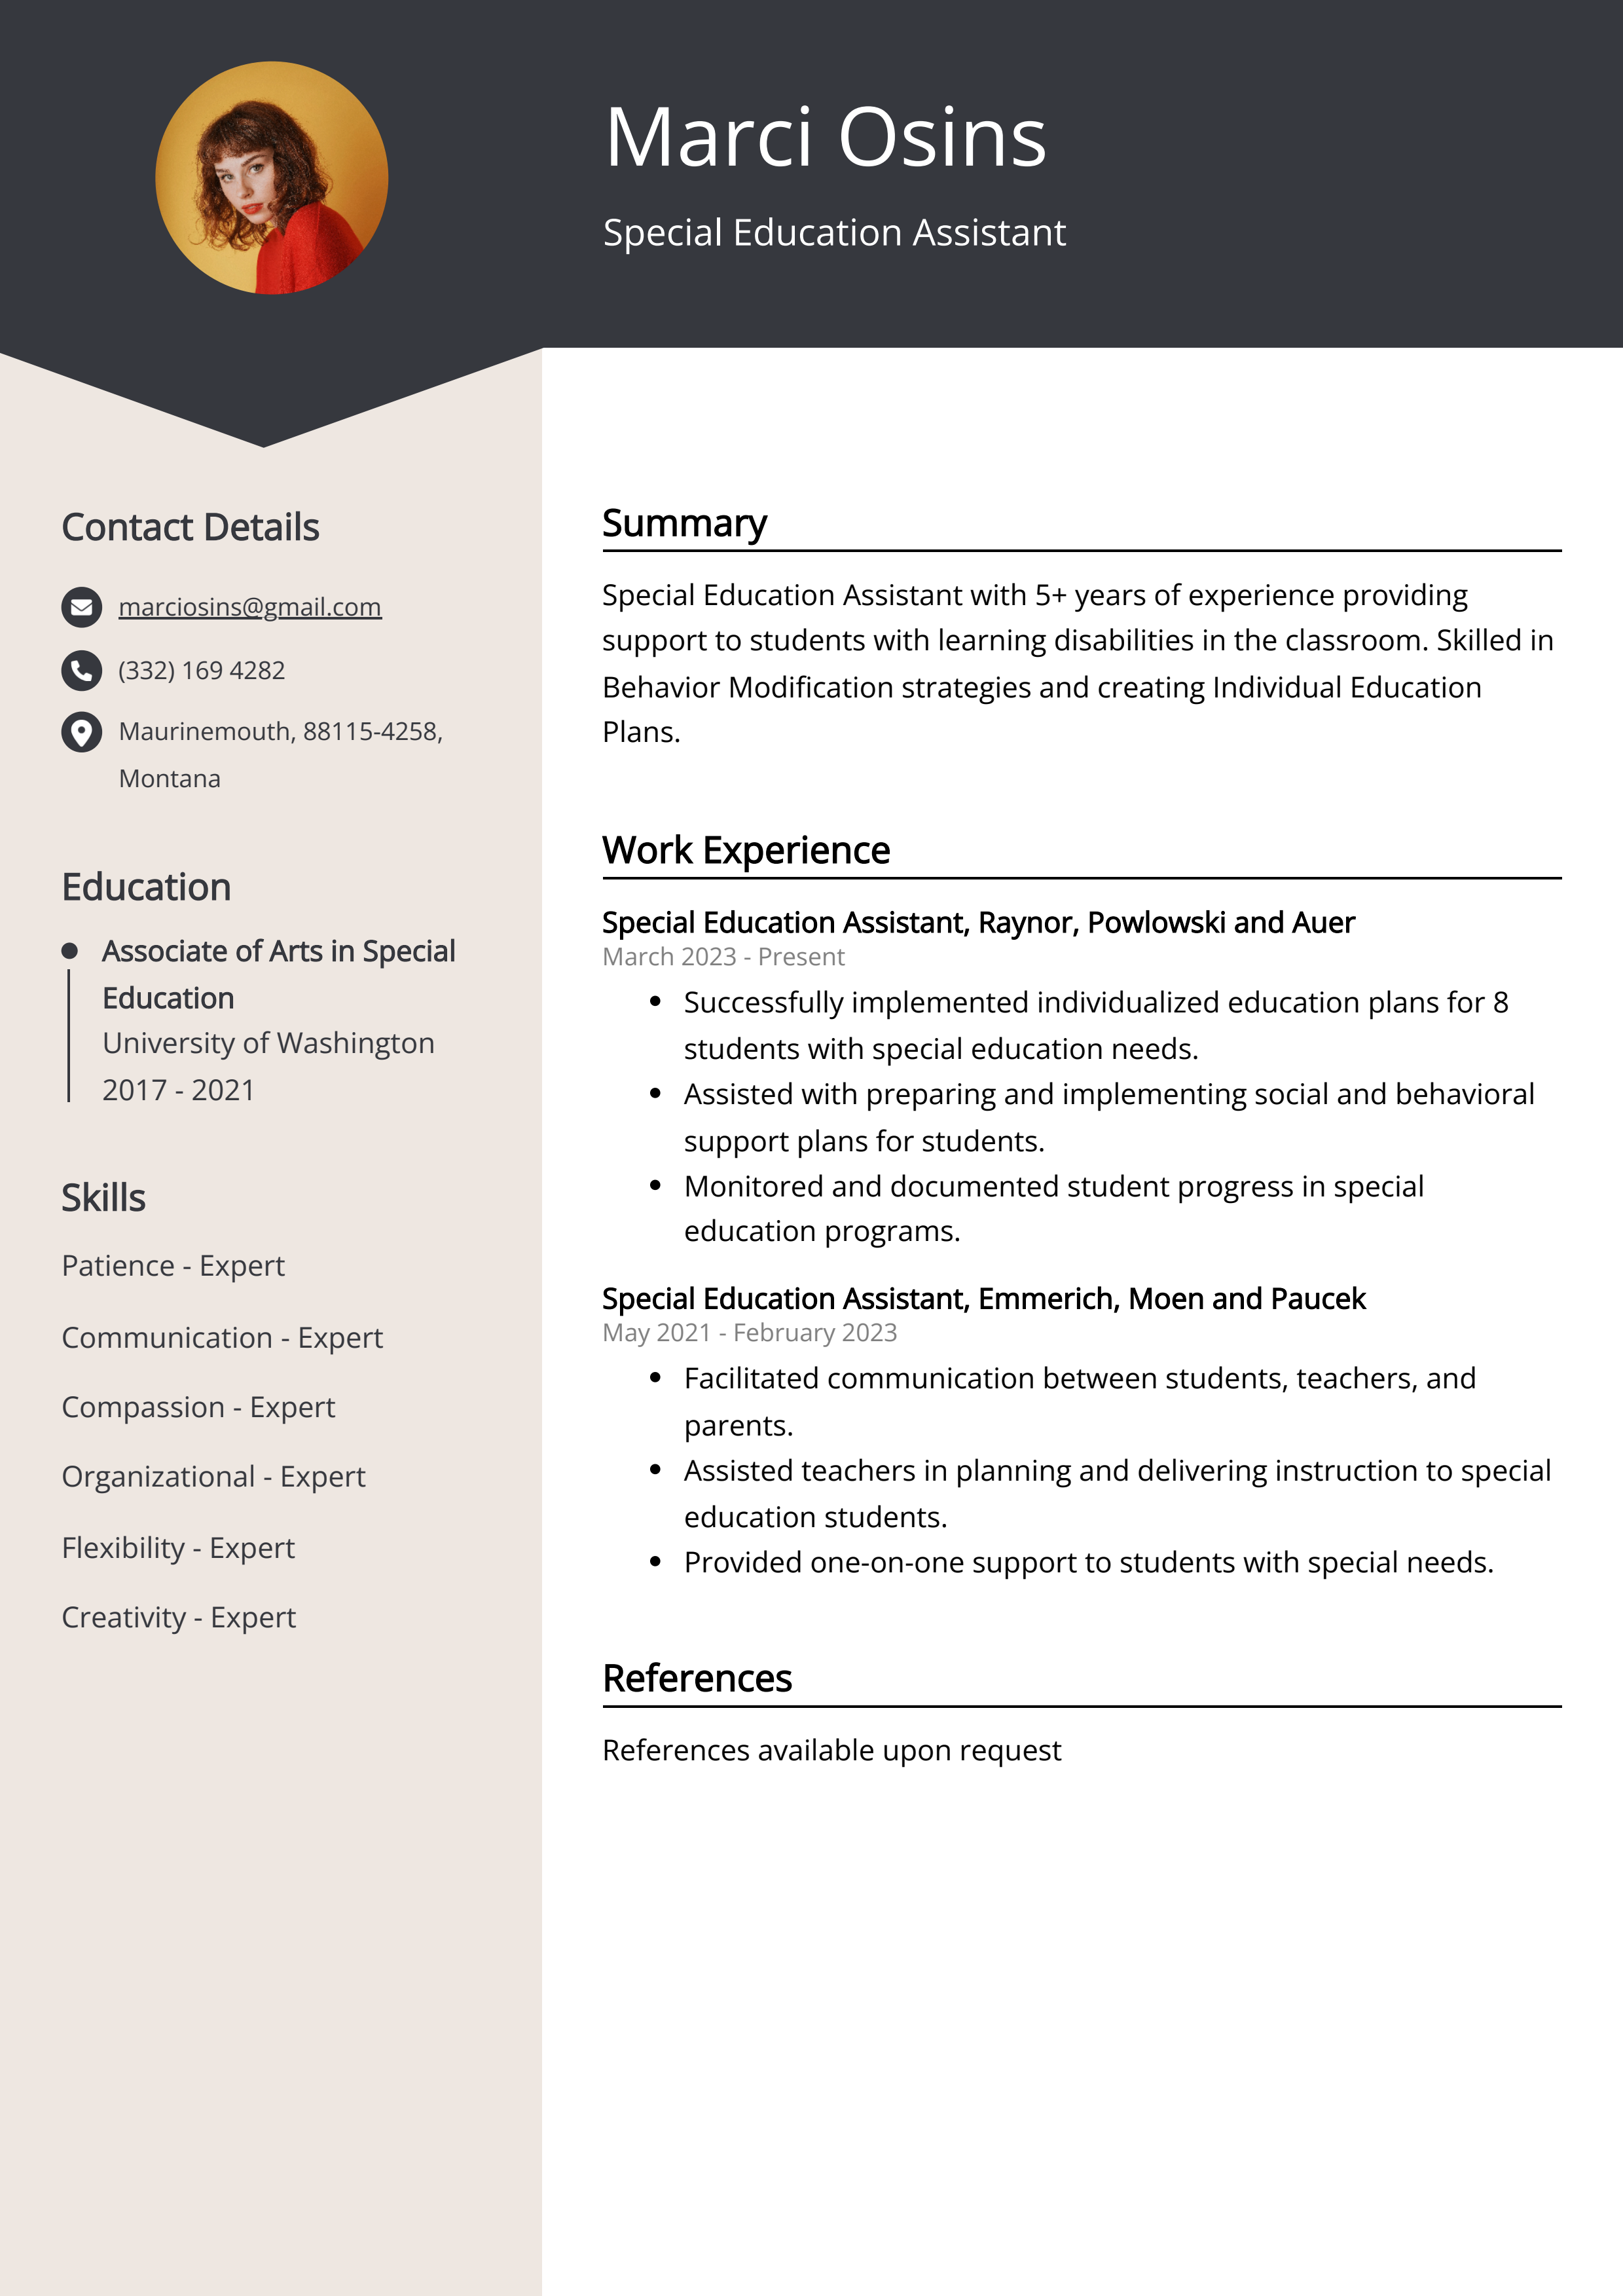 Special Education Assistant CV Example